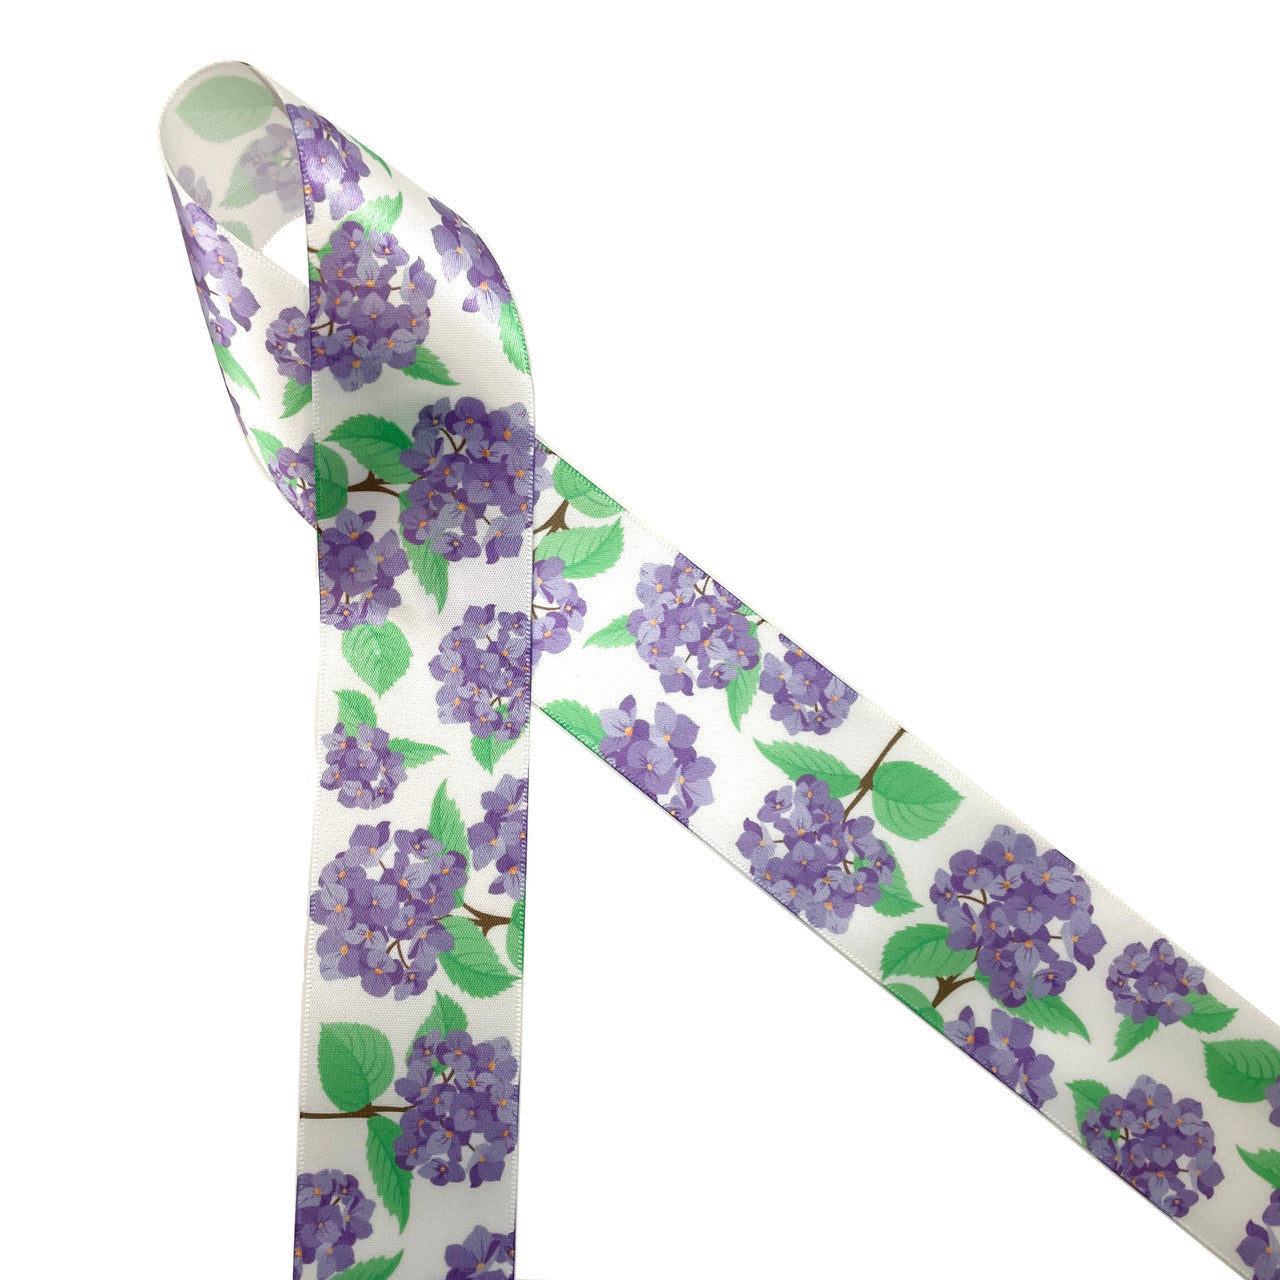 Purple hydrangea blossoms with green leaves printed on 1.5" white single face satin ribbon is the perfect ribbon for Spring and Summer crafting! This is the perfect ribbon for gift wrap, hair bows, hat bands, head bands and quilting. This is a great ribbon for Mother's Day and Summer bridal showers too! All our ribbon is designed an printed in the USA